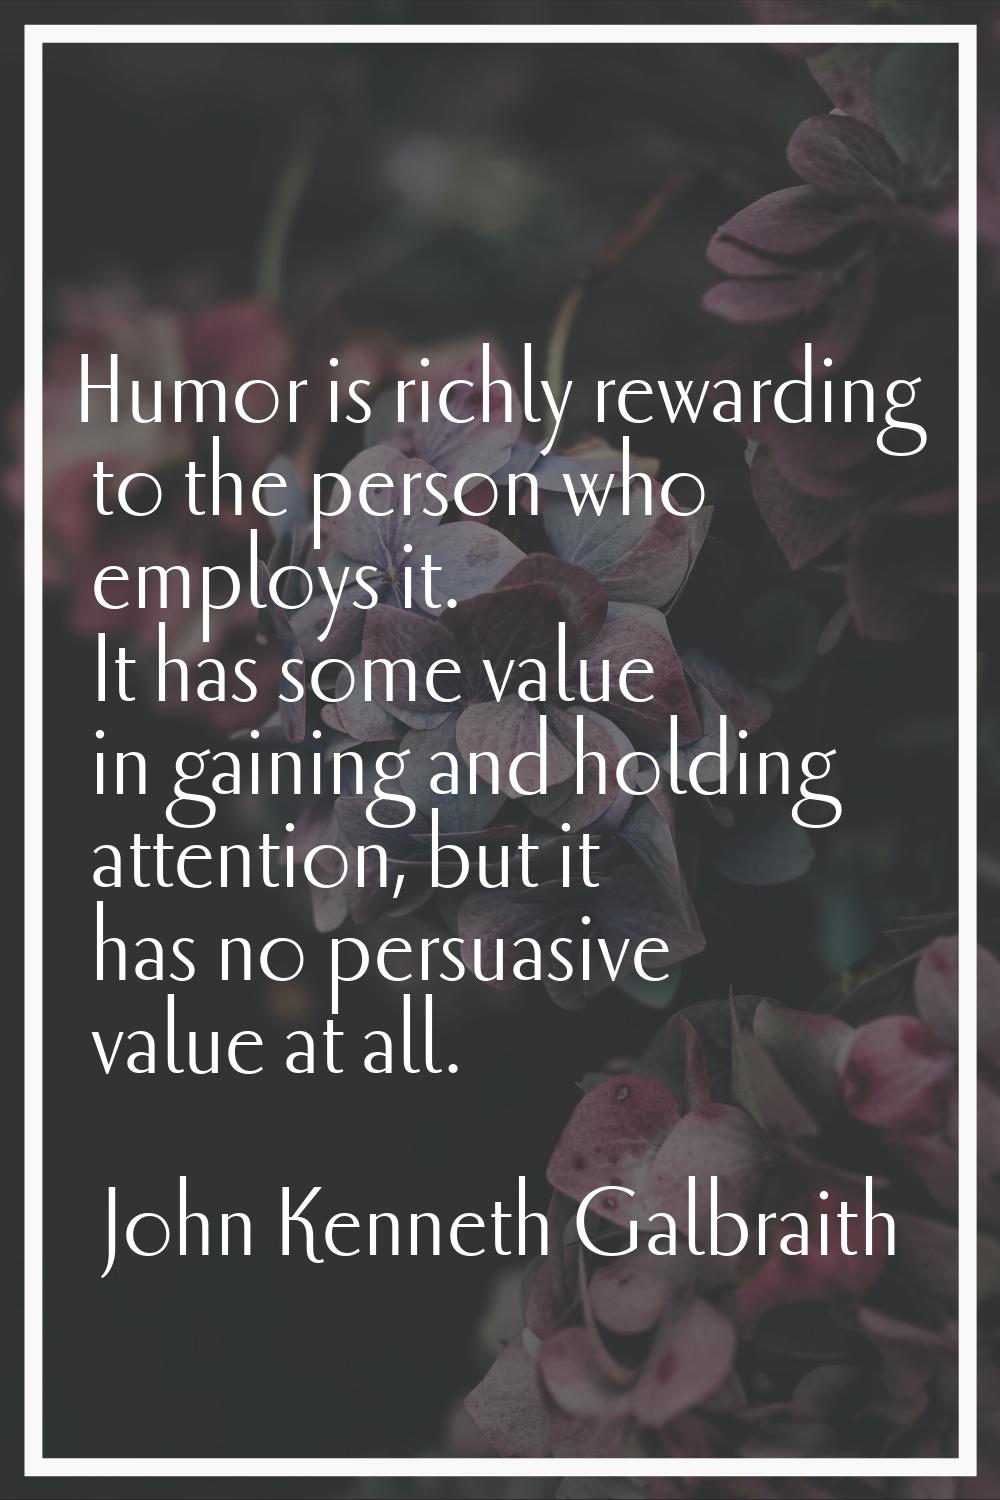 Humor is richly rewarding to the person who employs it. It has some value in gaining and holding at